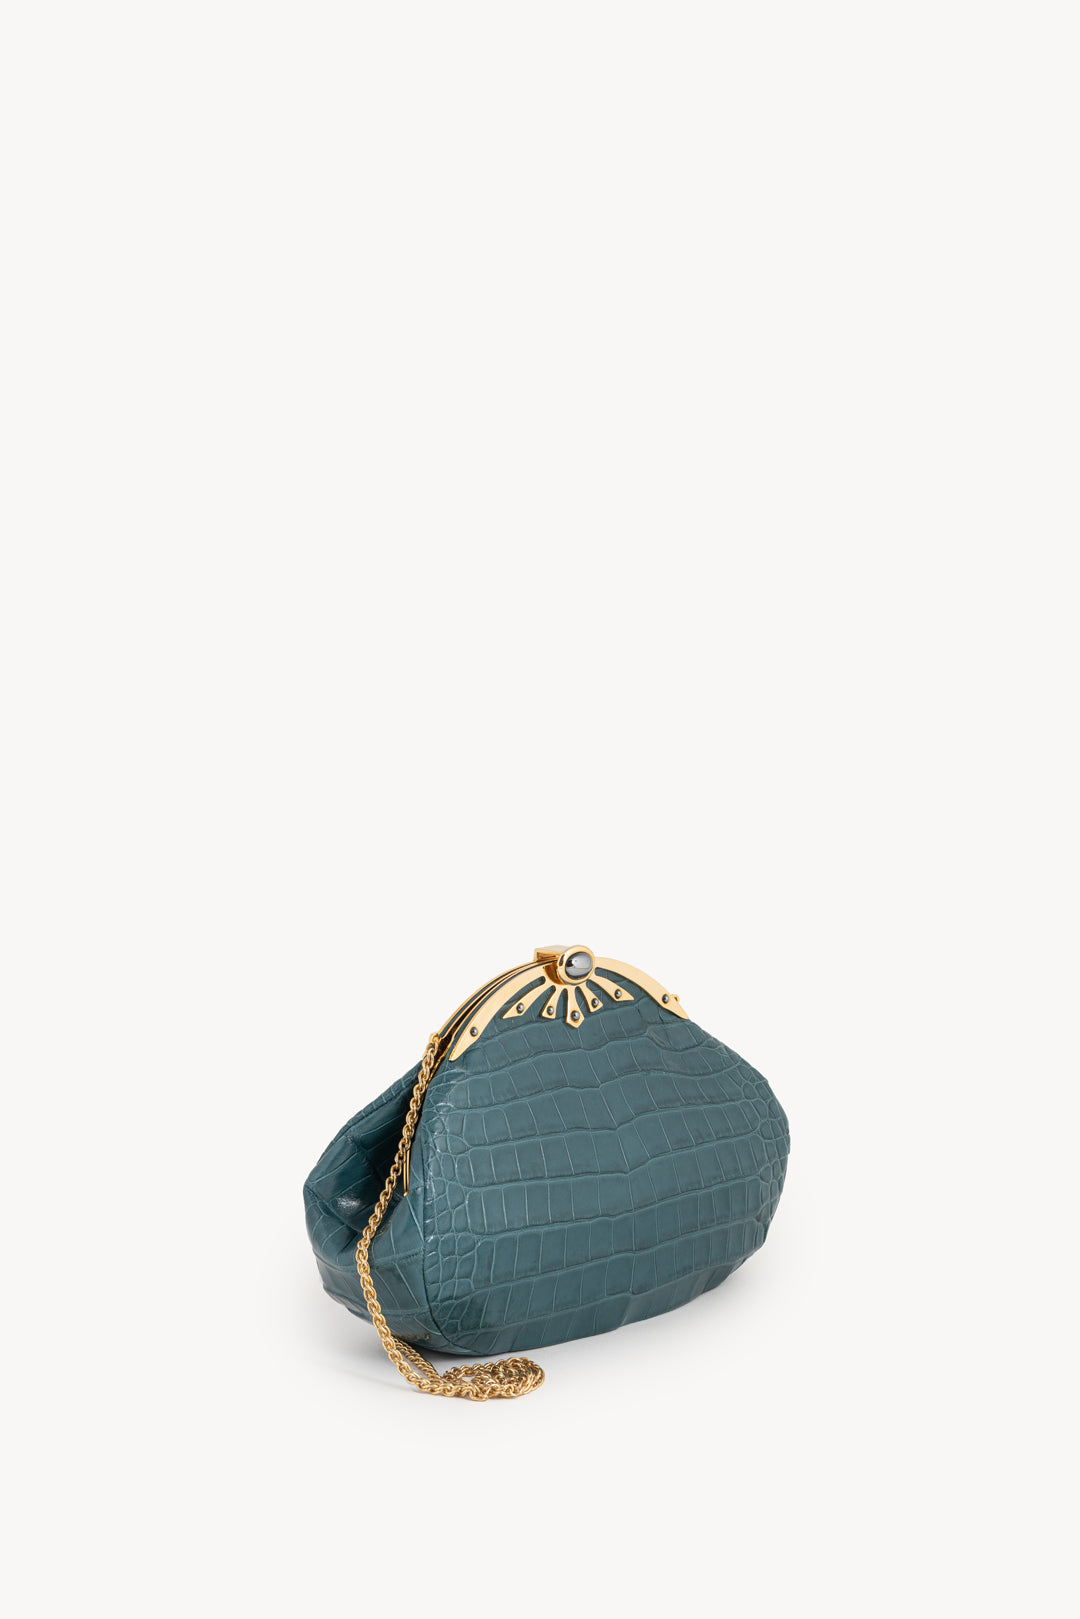 One-Off Clutch in exotic leather - Blue-green